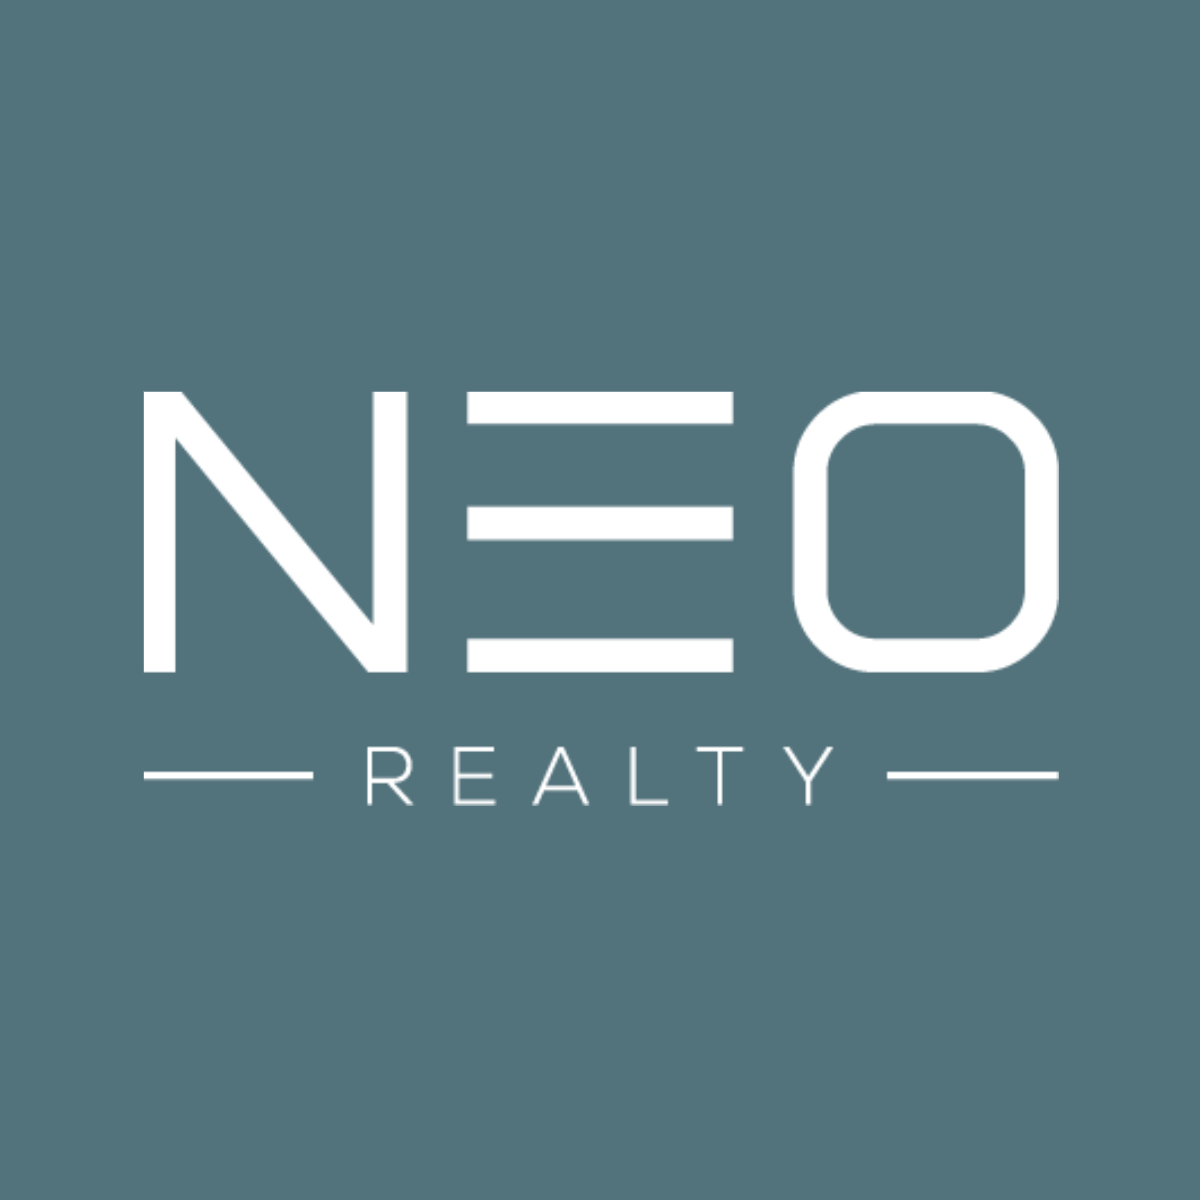 Neo Realty Real Estate